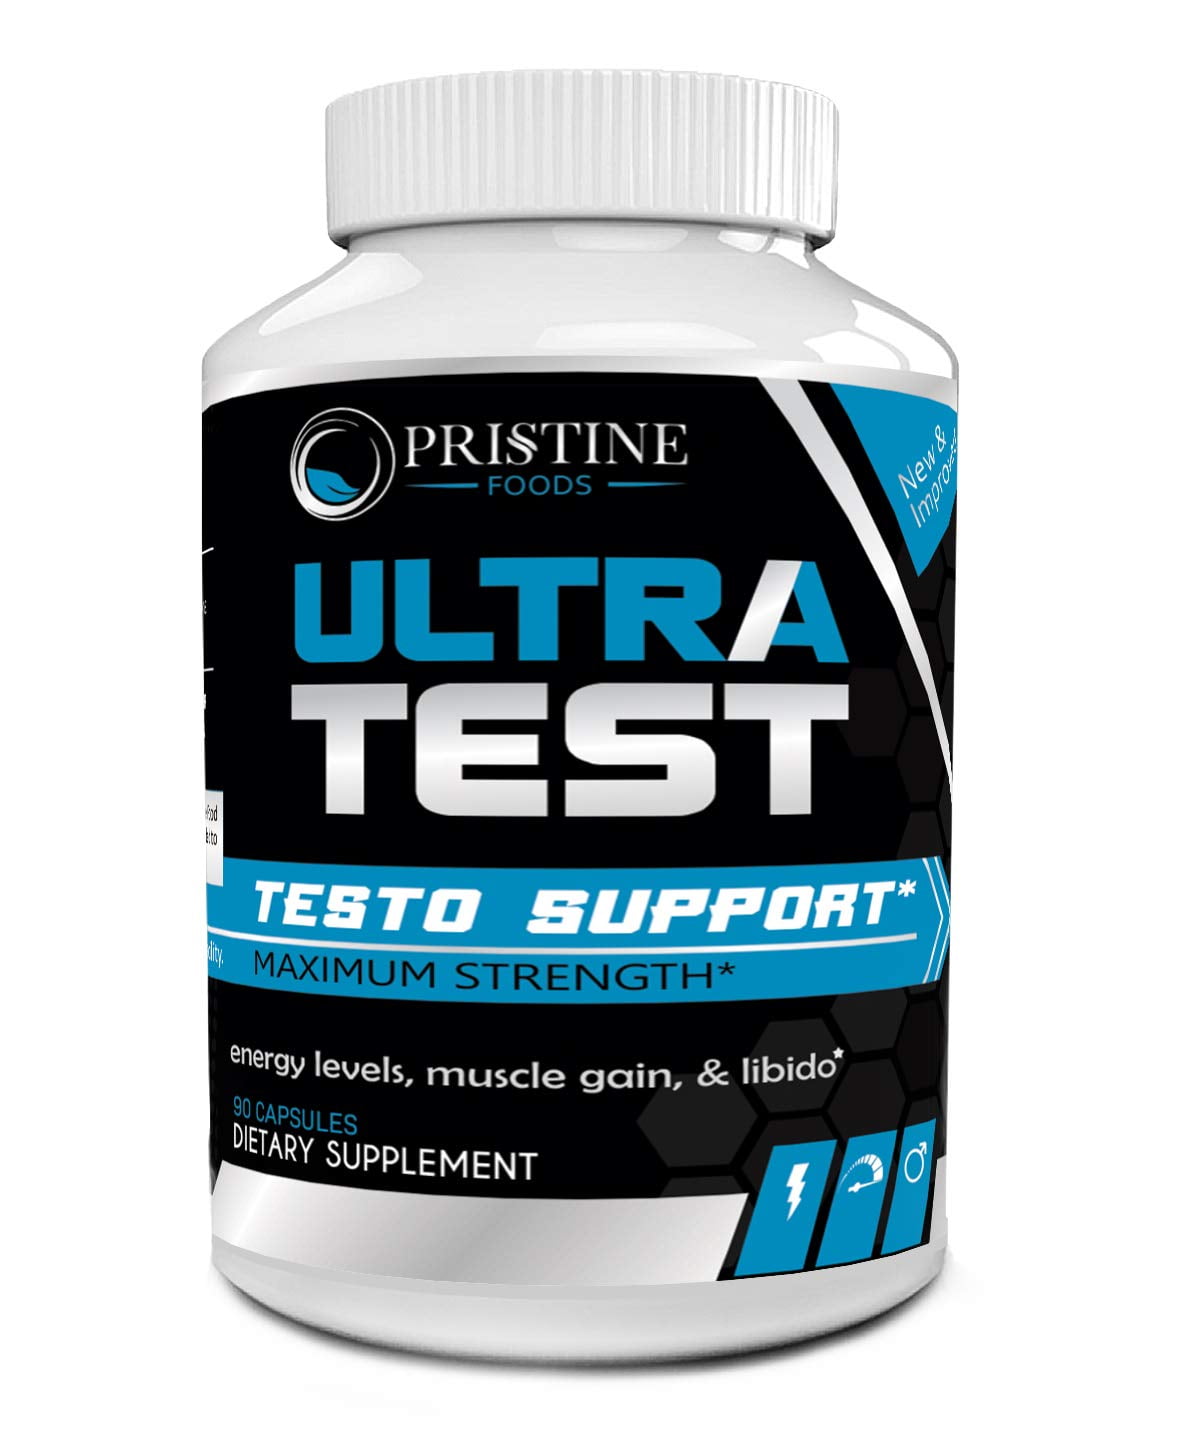 bodystrong test boost ultra 90 caps